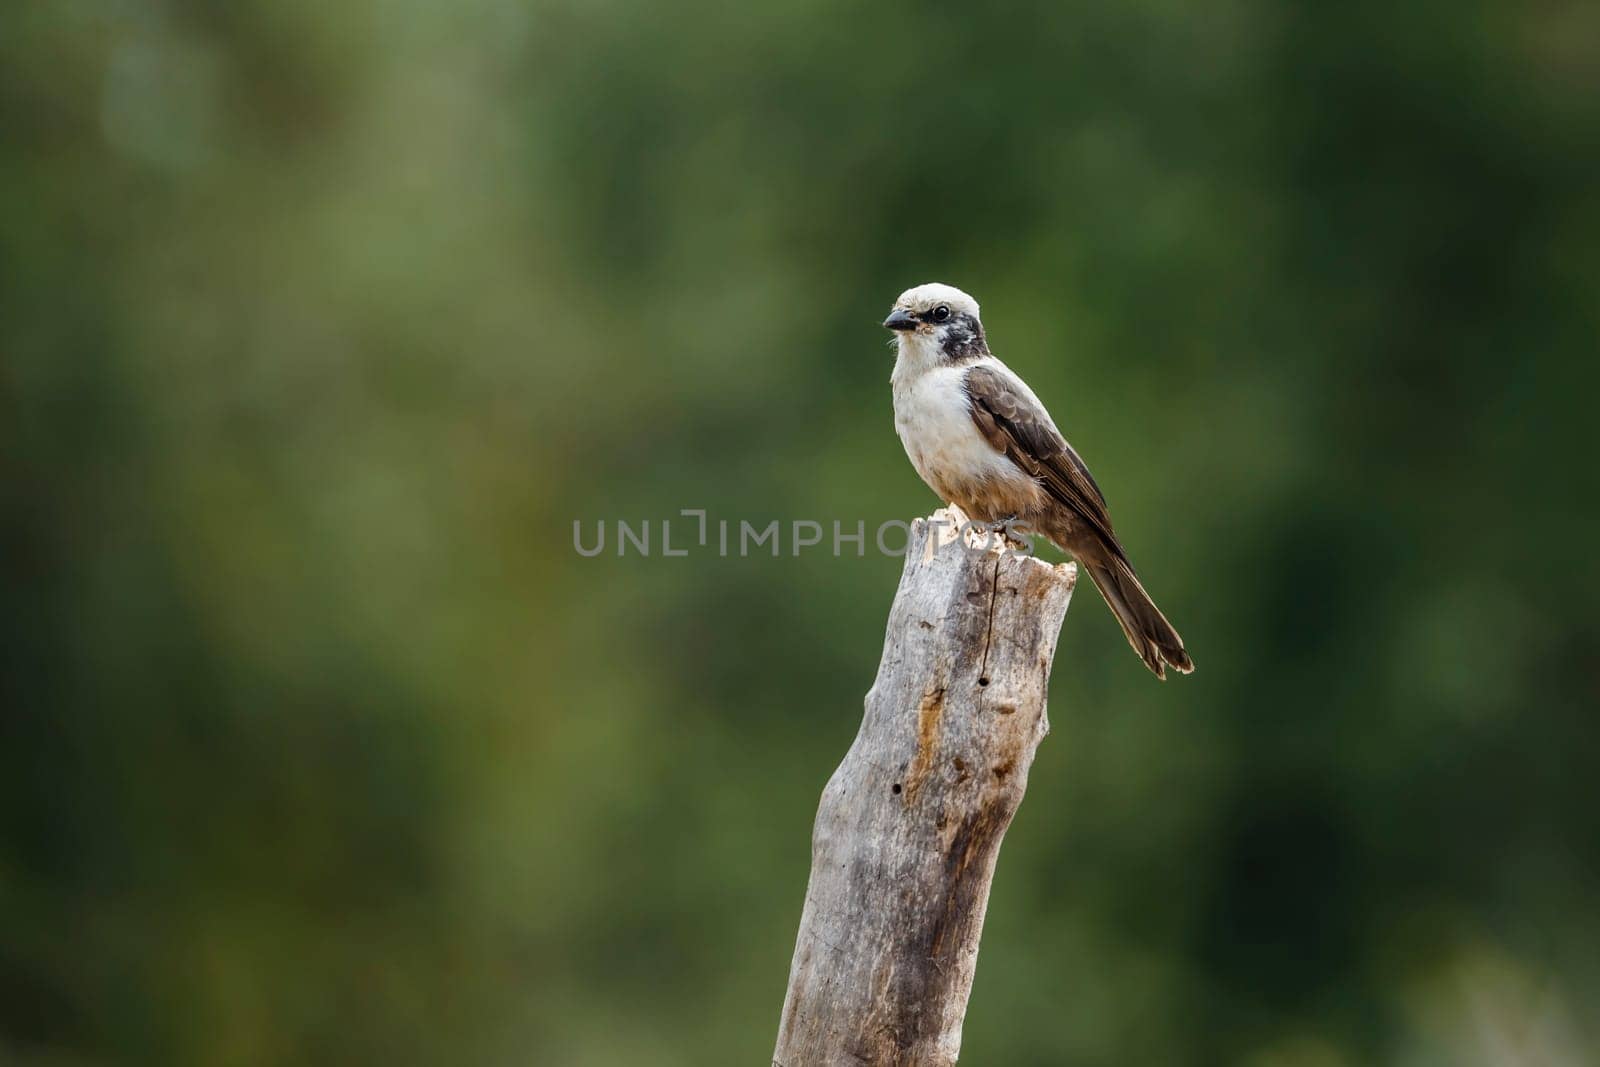 White crowned Shrike standing on a log isolated in natural background in Kruger National park, South Africa ; Specie Eurocephalus anguitimens family of Laniidae